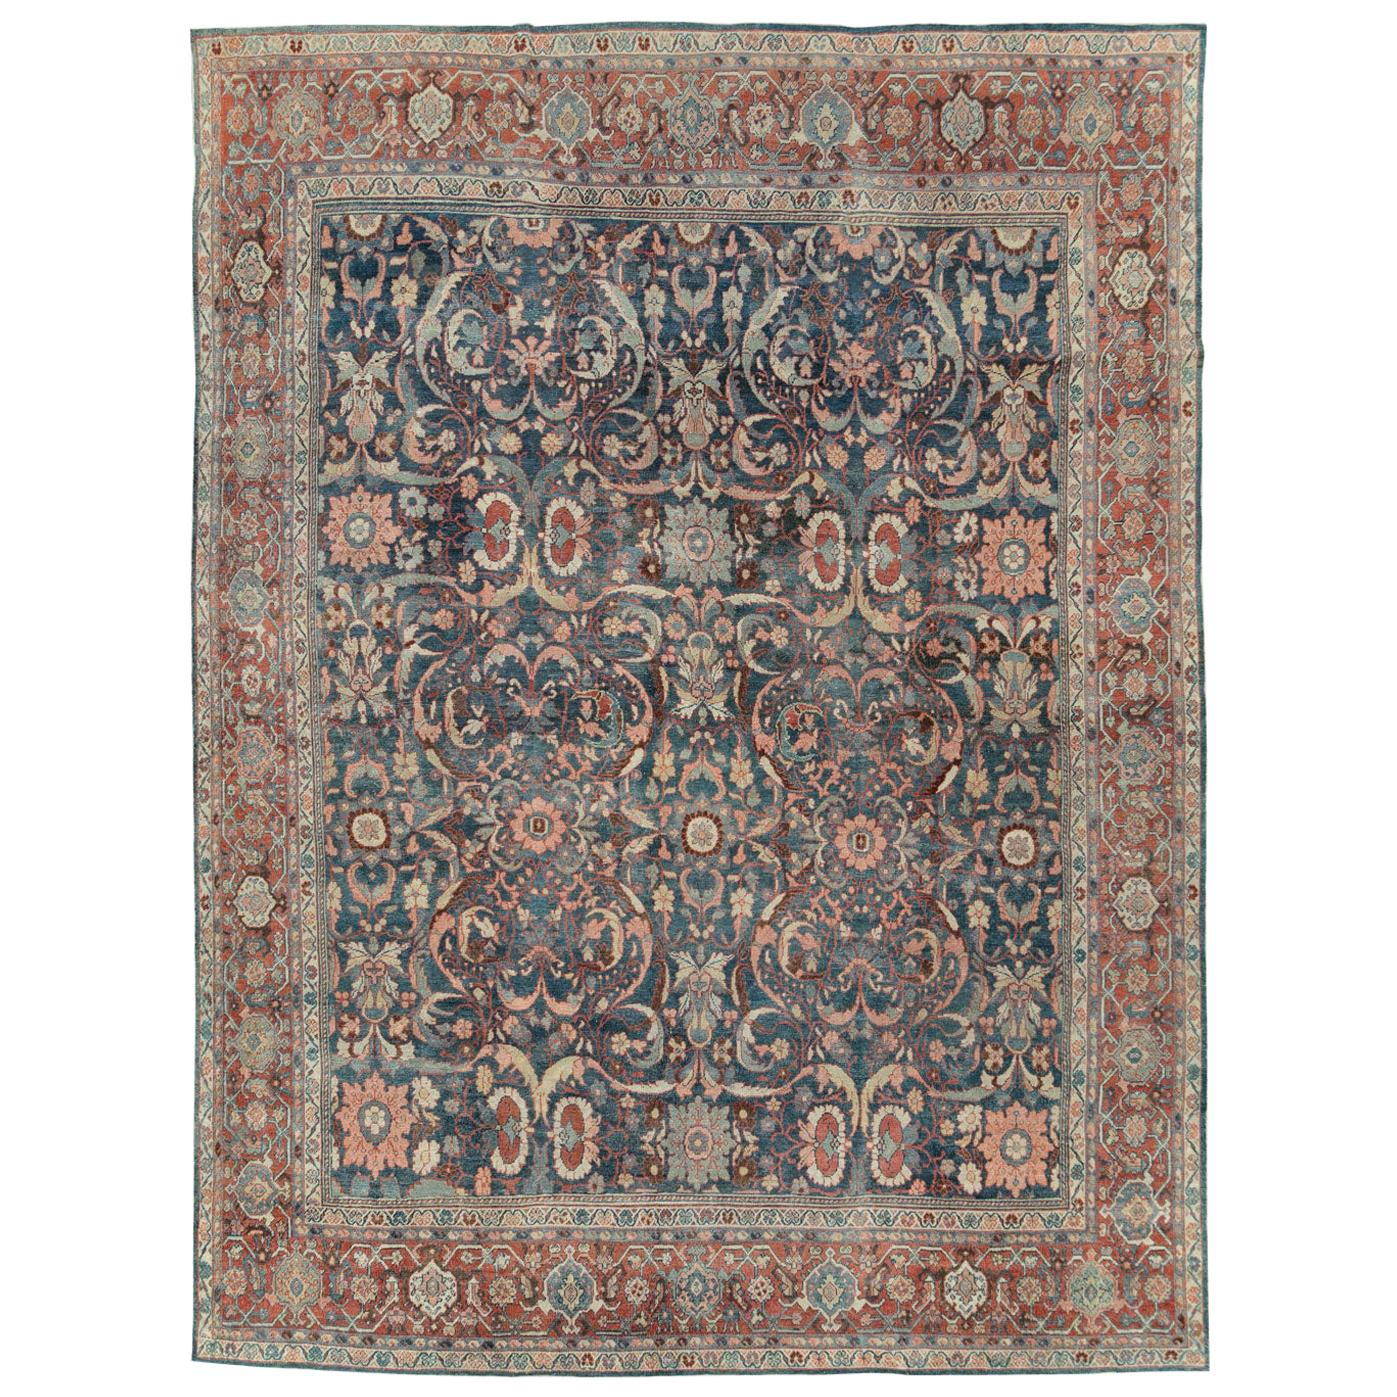 Early 20th Century Handmade Persian Mahal Room Size Carpet in Blue and Red